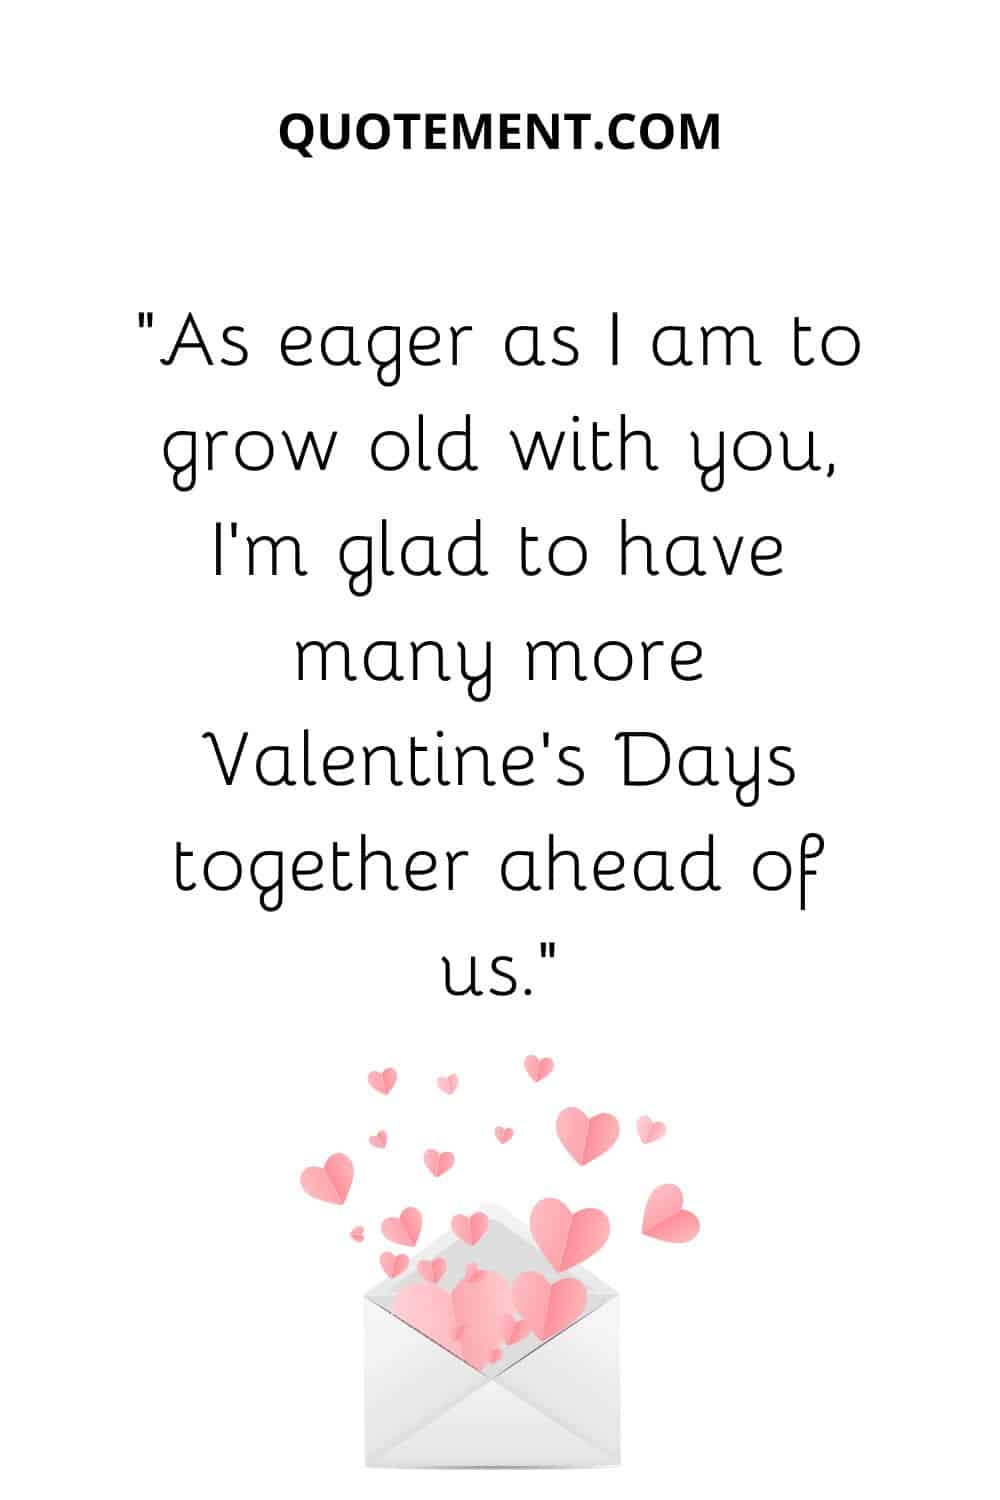 “As eager as I am to grow old with you, I’m glad to have many more Valentine’s Days together ahead of us.”